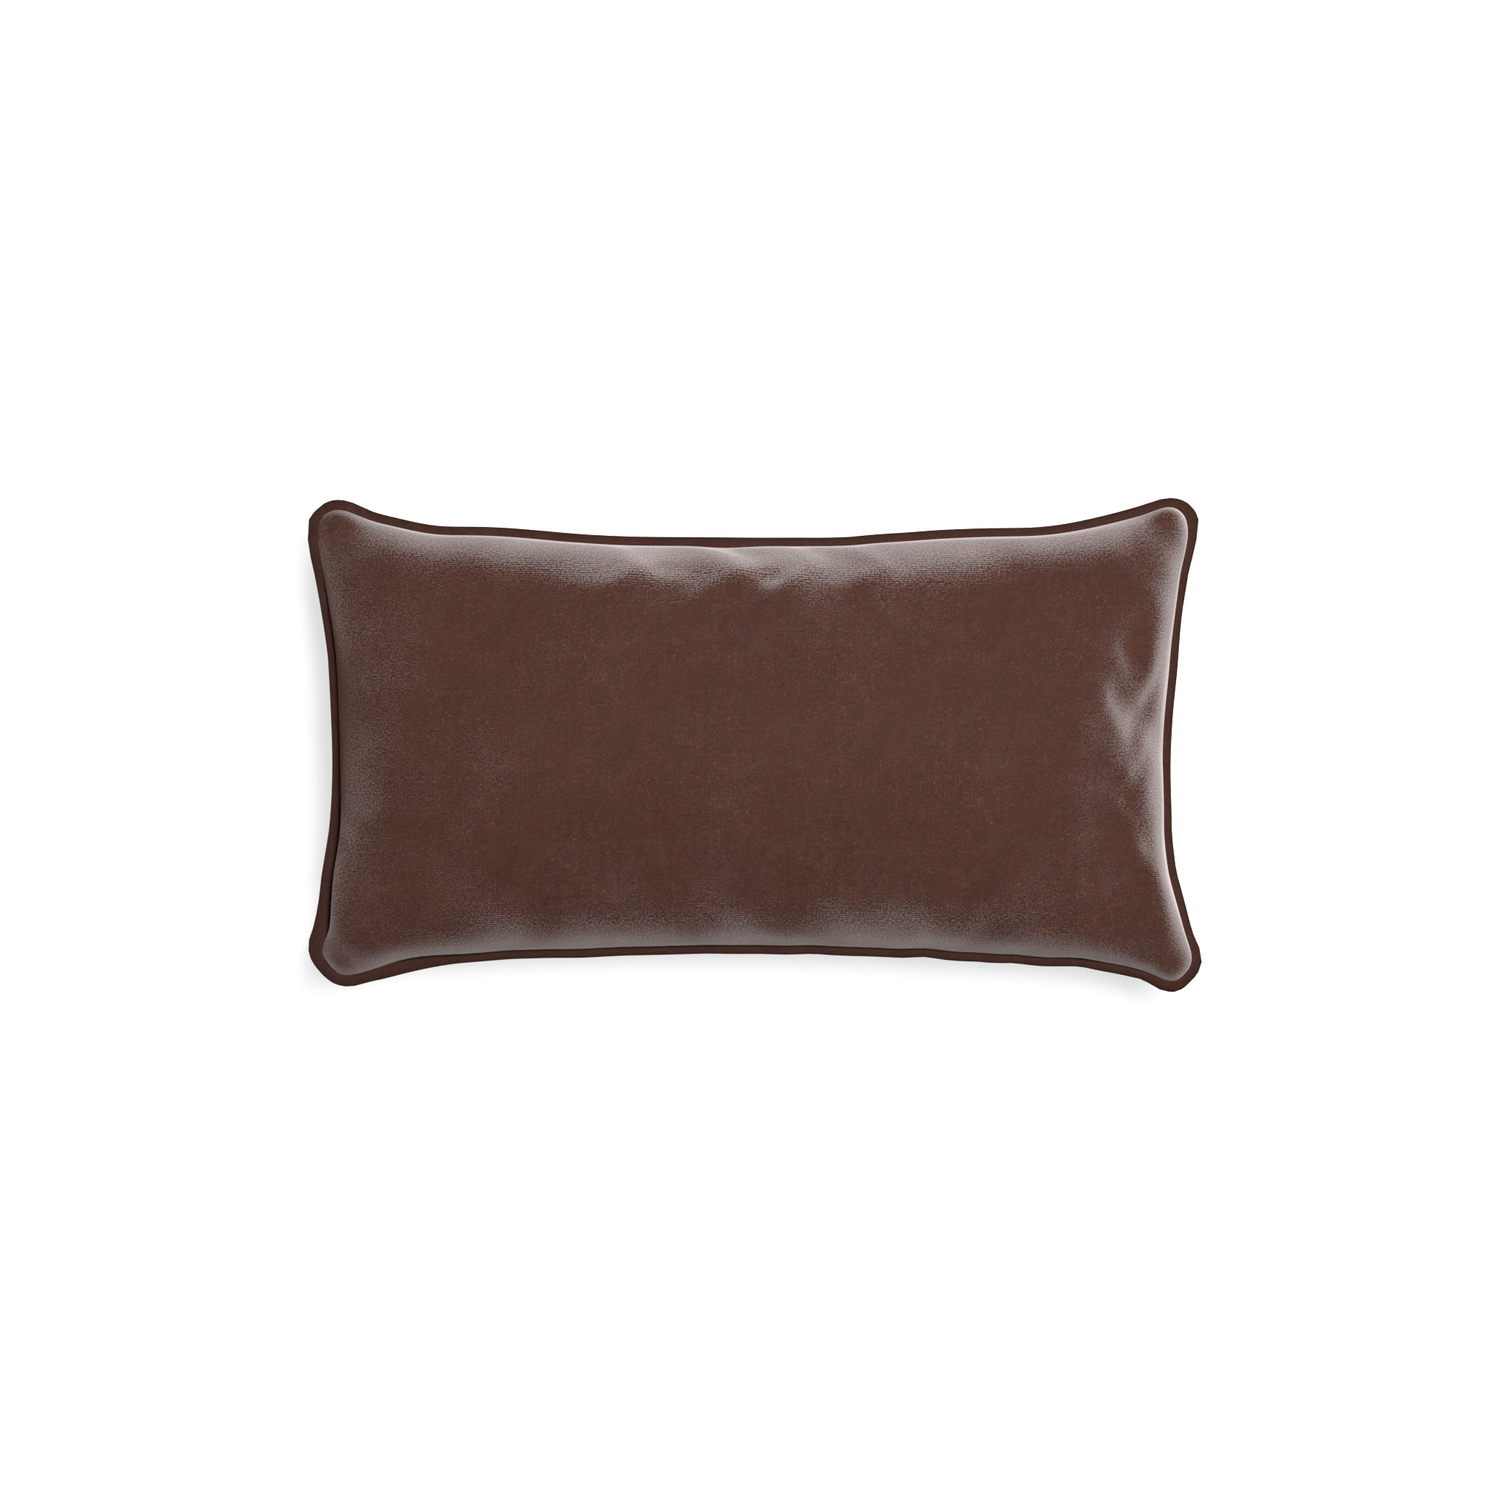 rectangle brown velvet pillow with brown piping